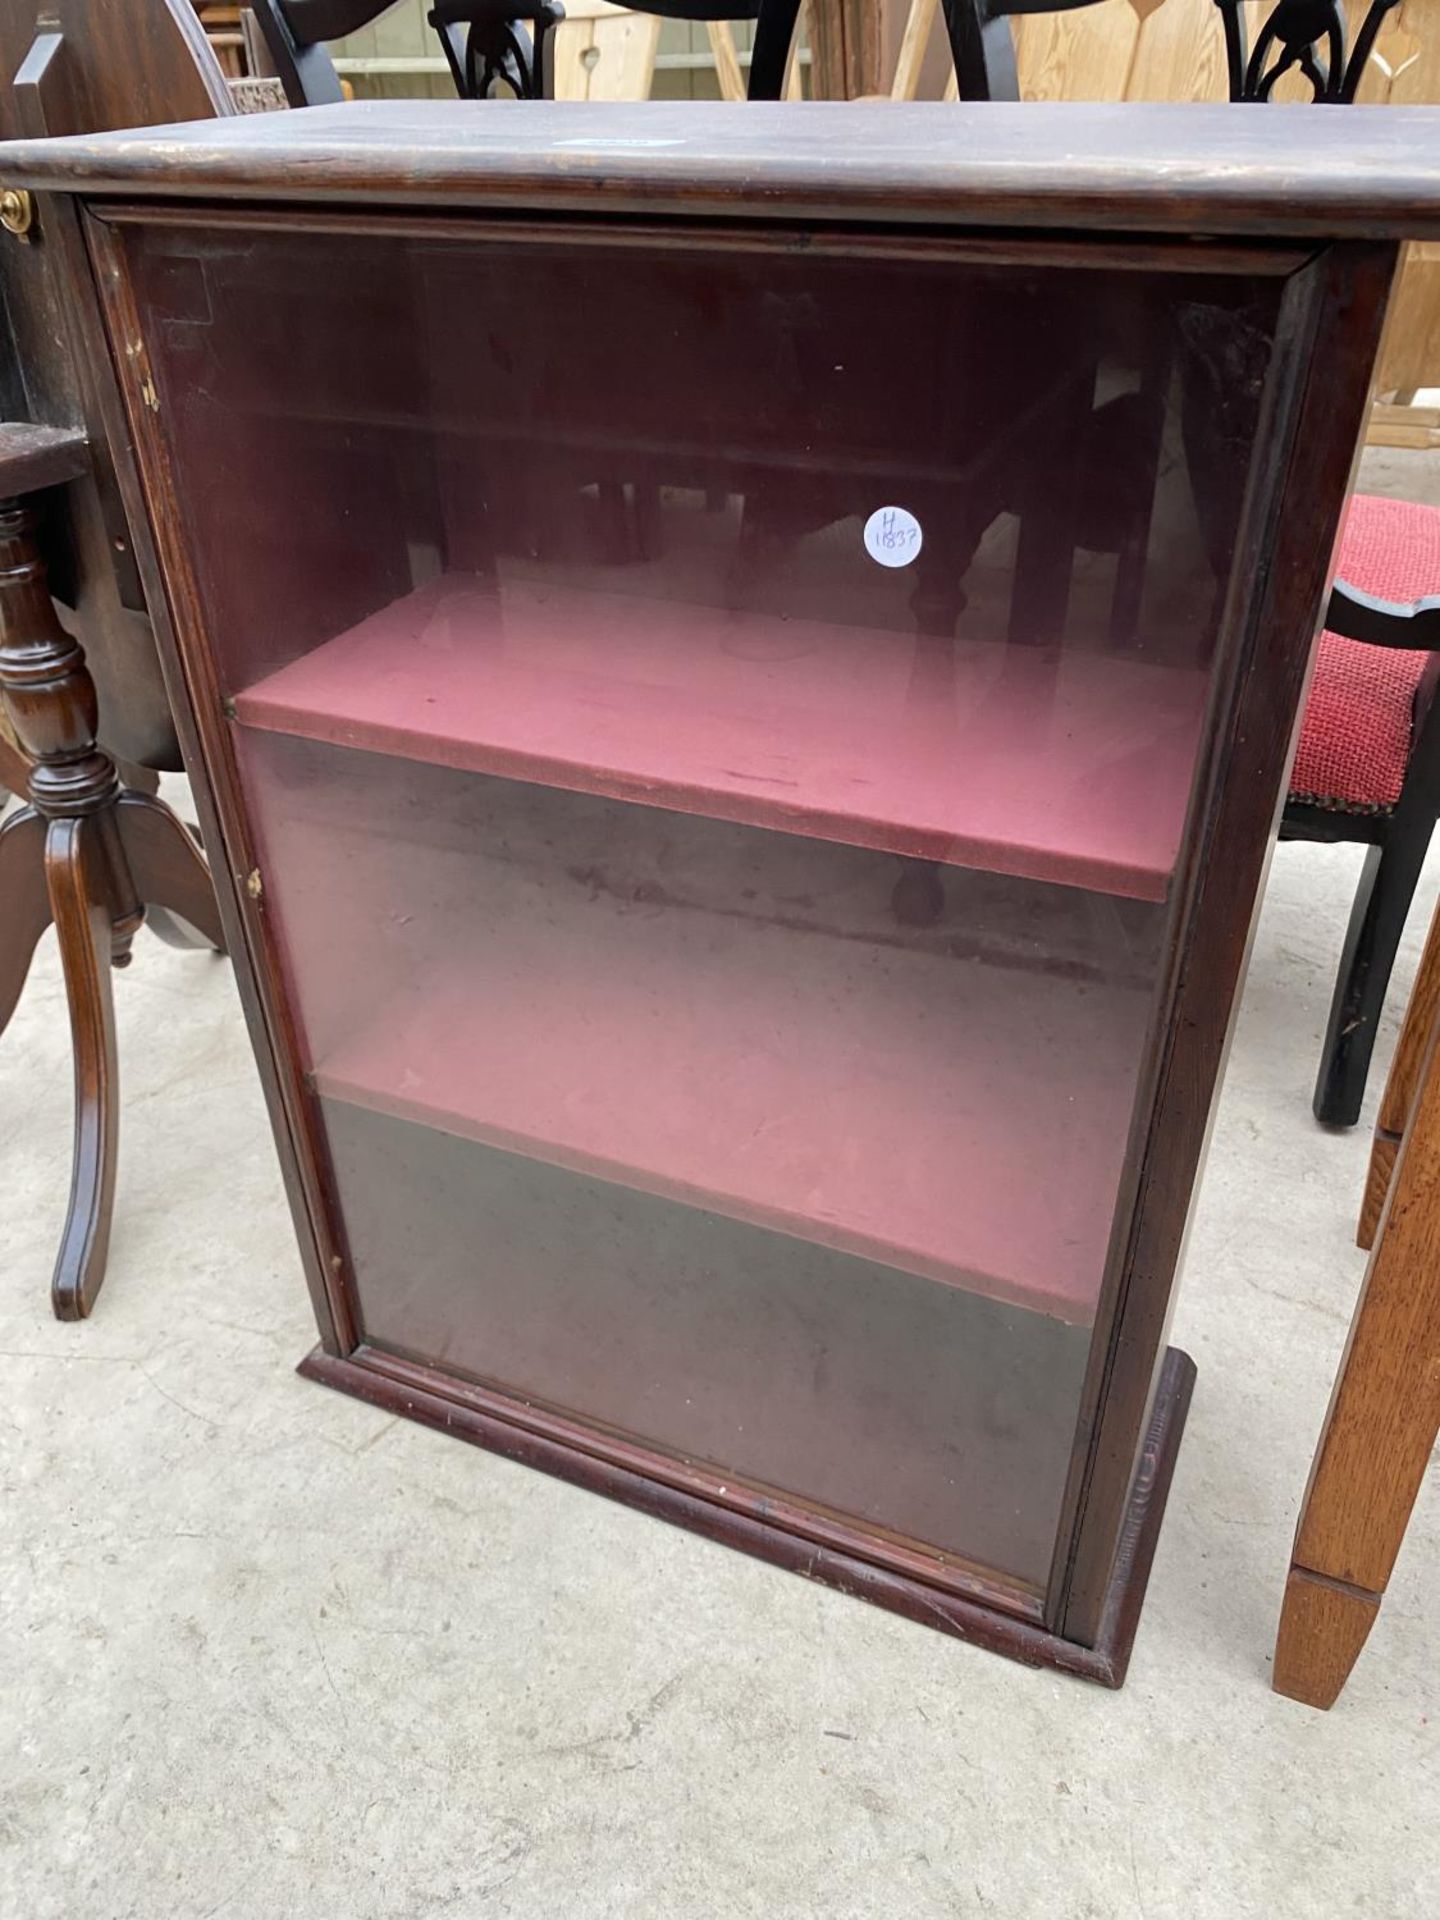 AN EDWARDIAN GLASS FRONTED SHOP COUNTER DISPLAY CASE, 19" WIDE - Image 2 of 3